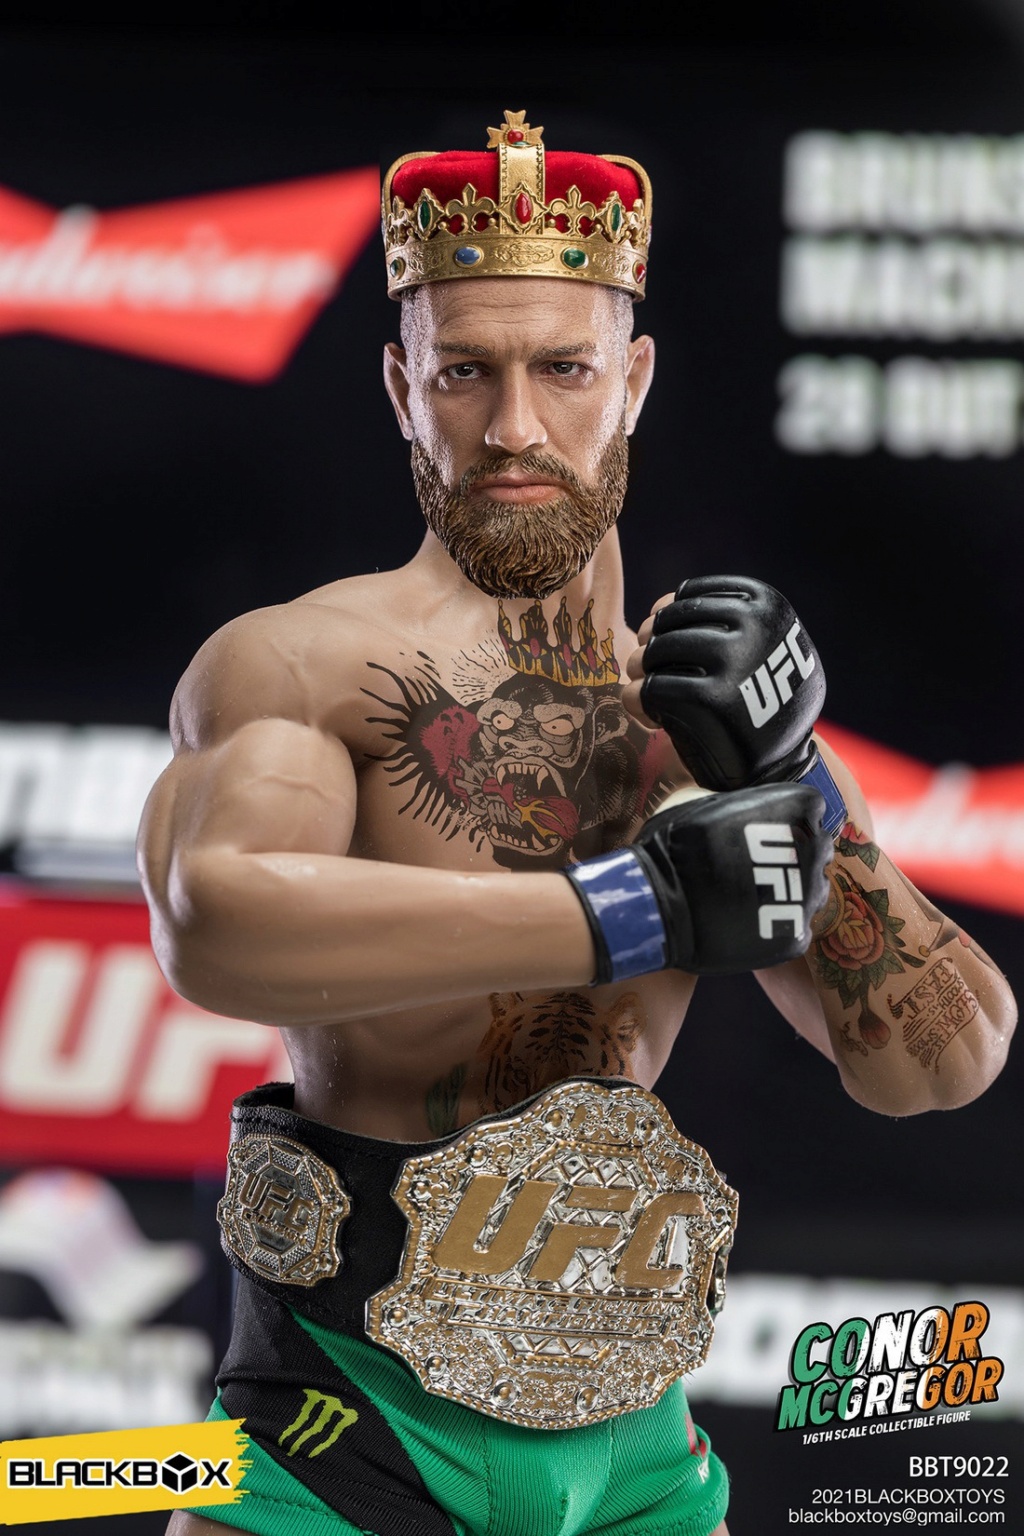 NEW PRODUCT: BLACKBOX: 1/6 Who Am I Series-The Ultimate Fighting King Connor-McGregor CONOR MCGREGOR 16353614